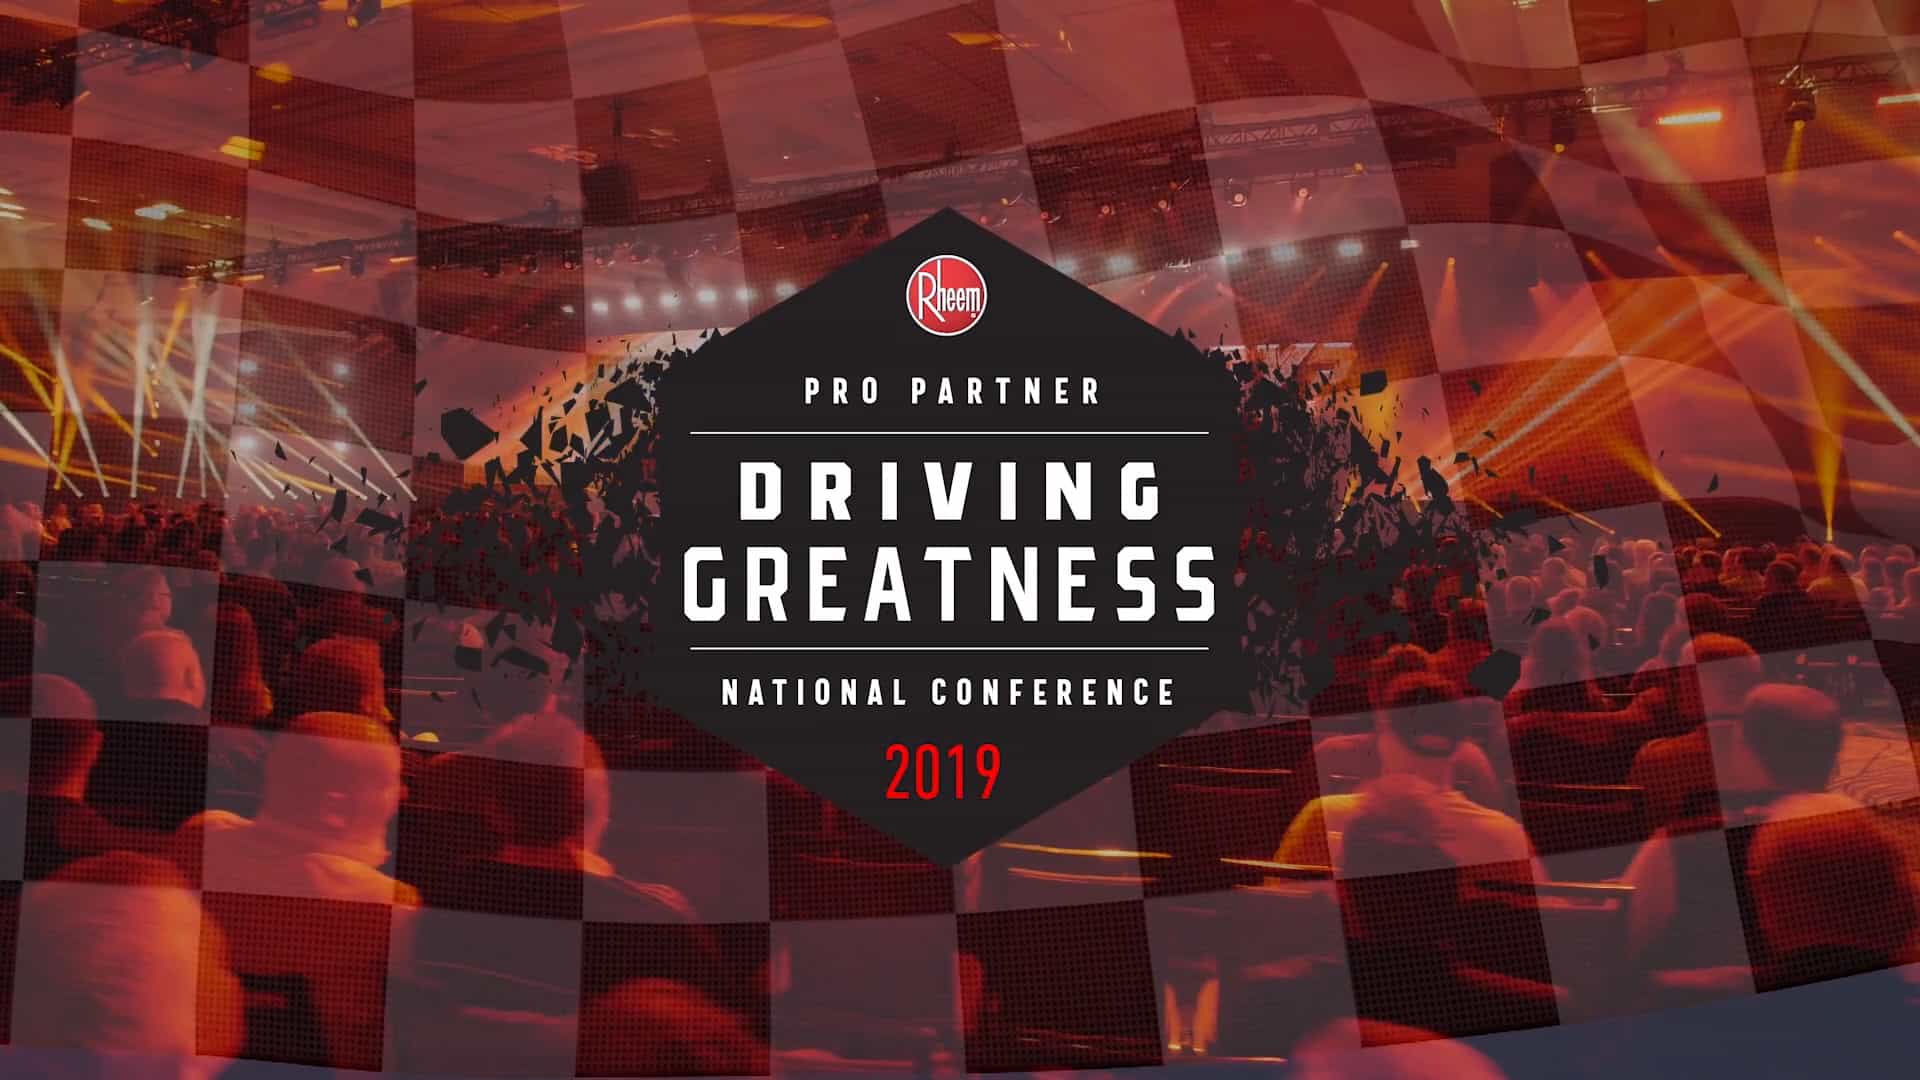 Driving Greatness For Rheem Big Red Rooster A Jll Pany